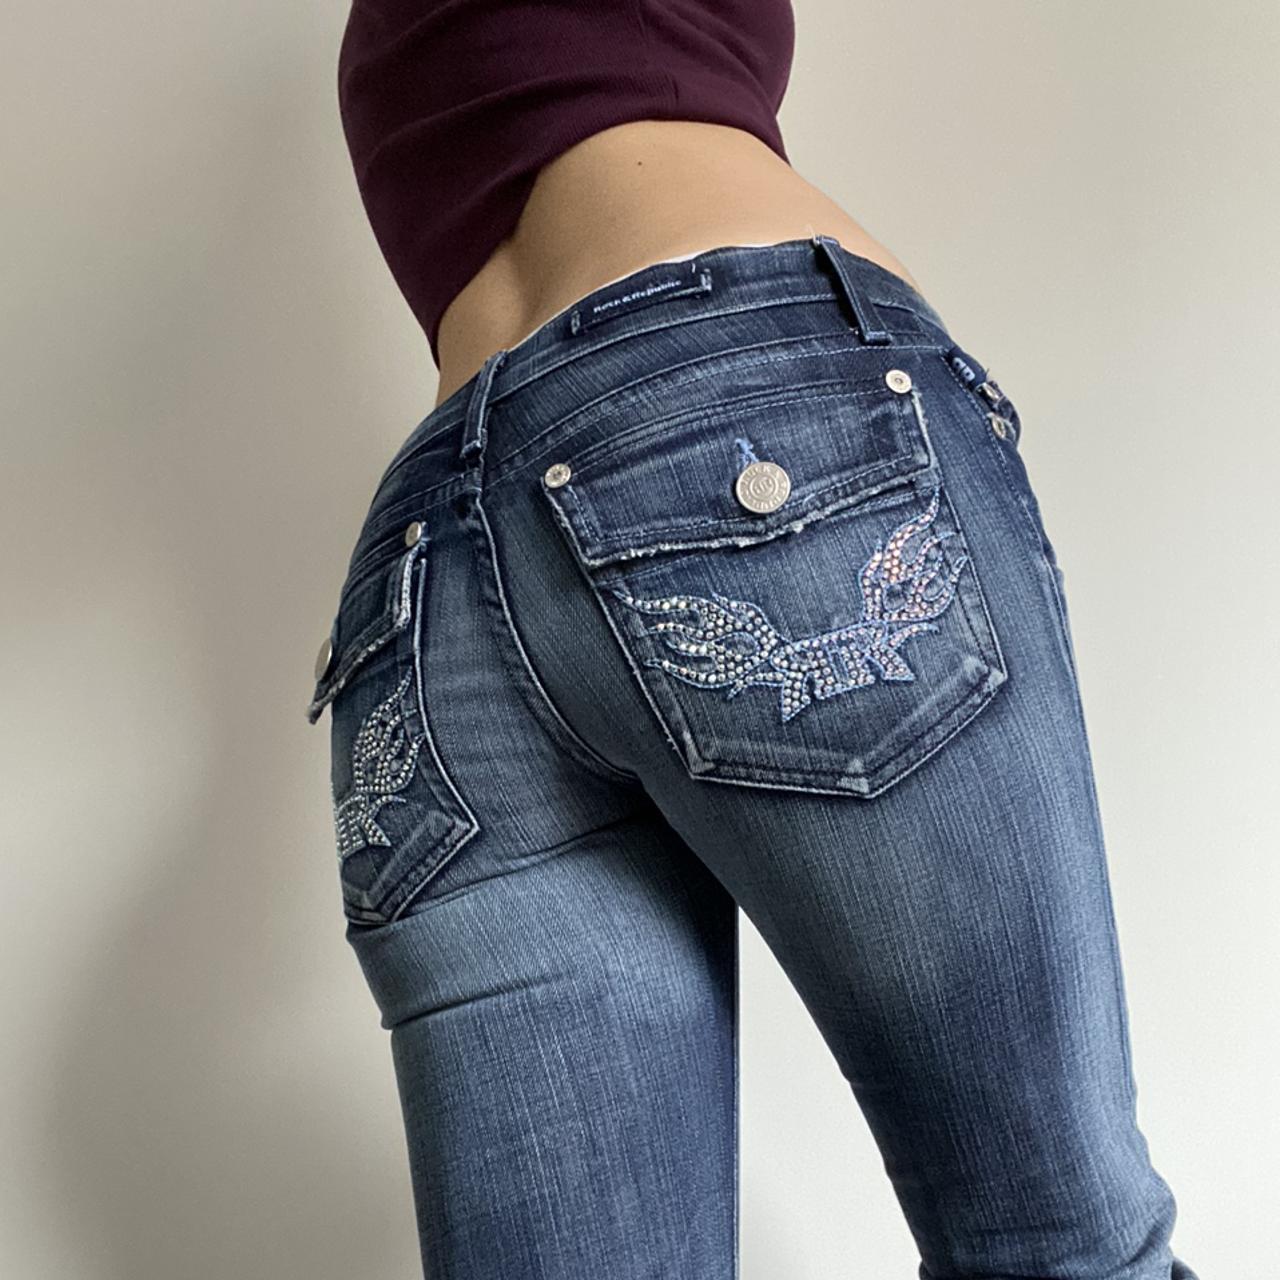 Rock and Republic Women's Jeans (2)